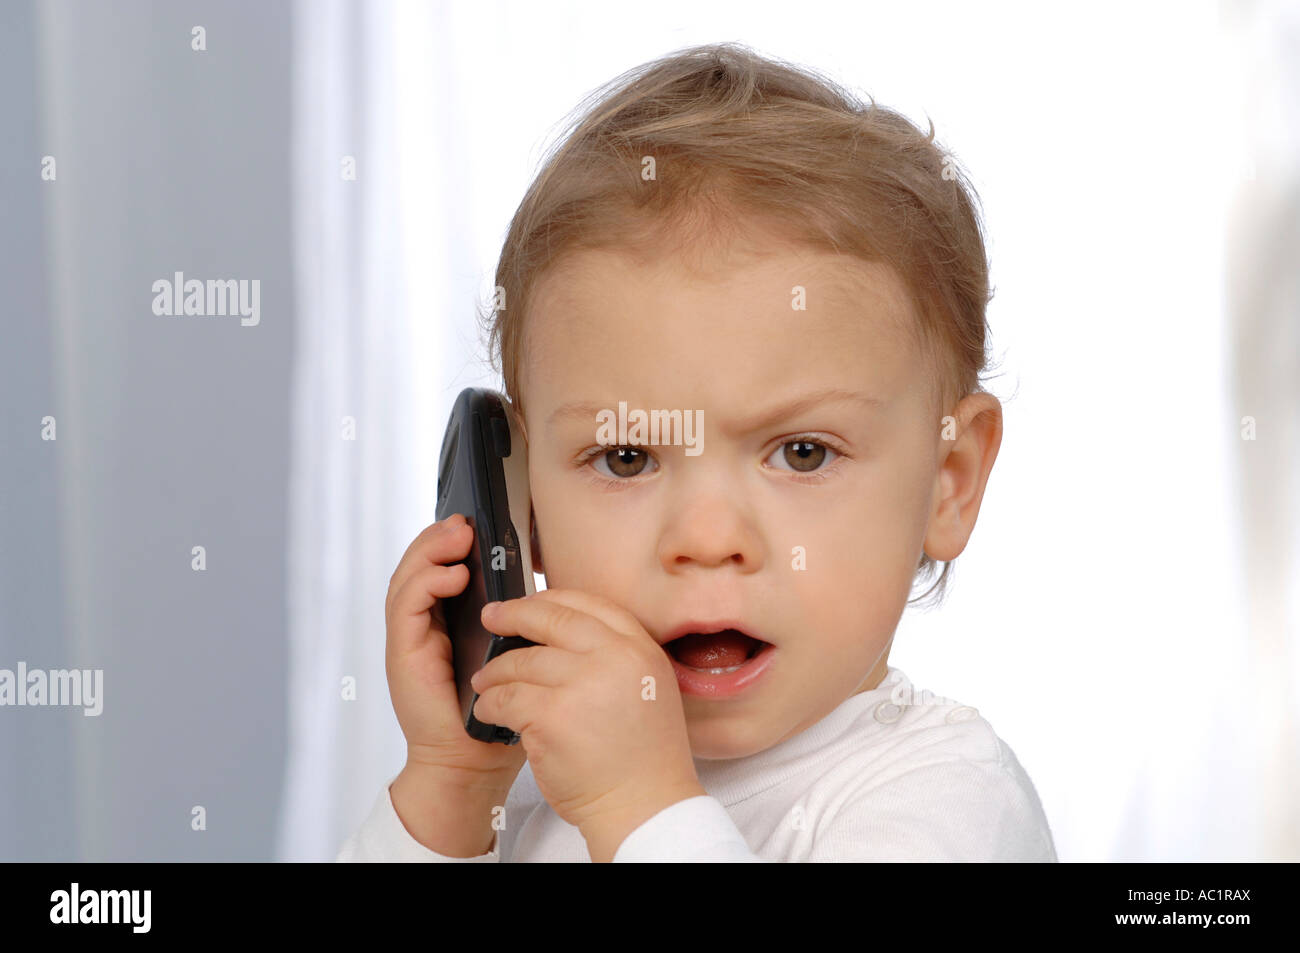 Little child using mobile phone, close-up Stock Photo